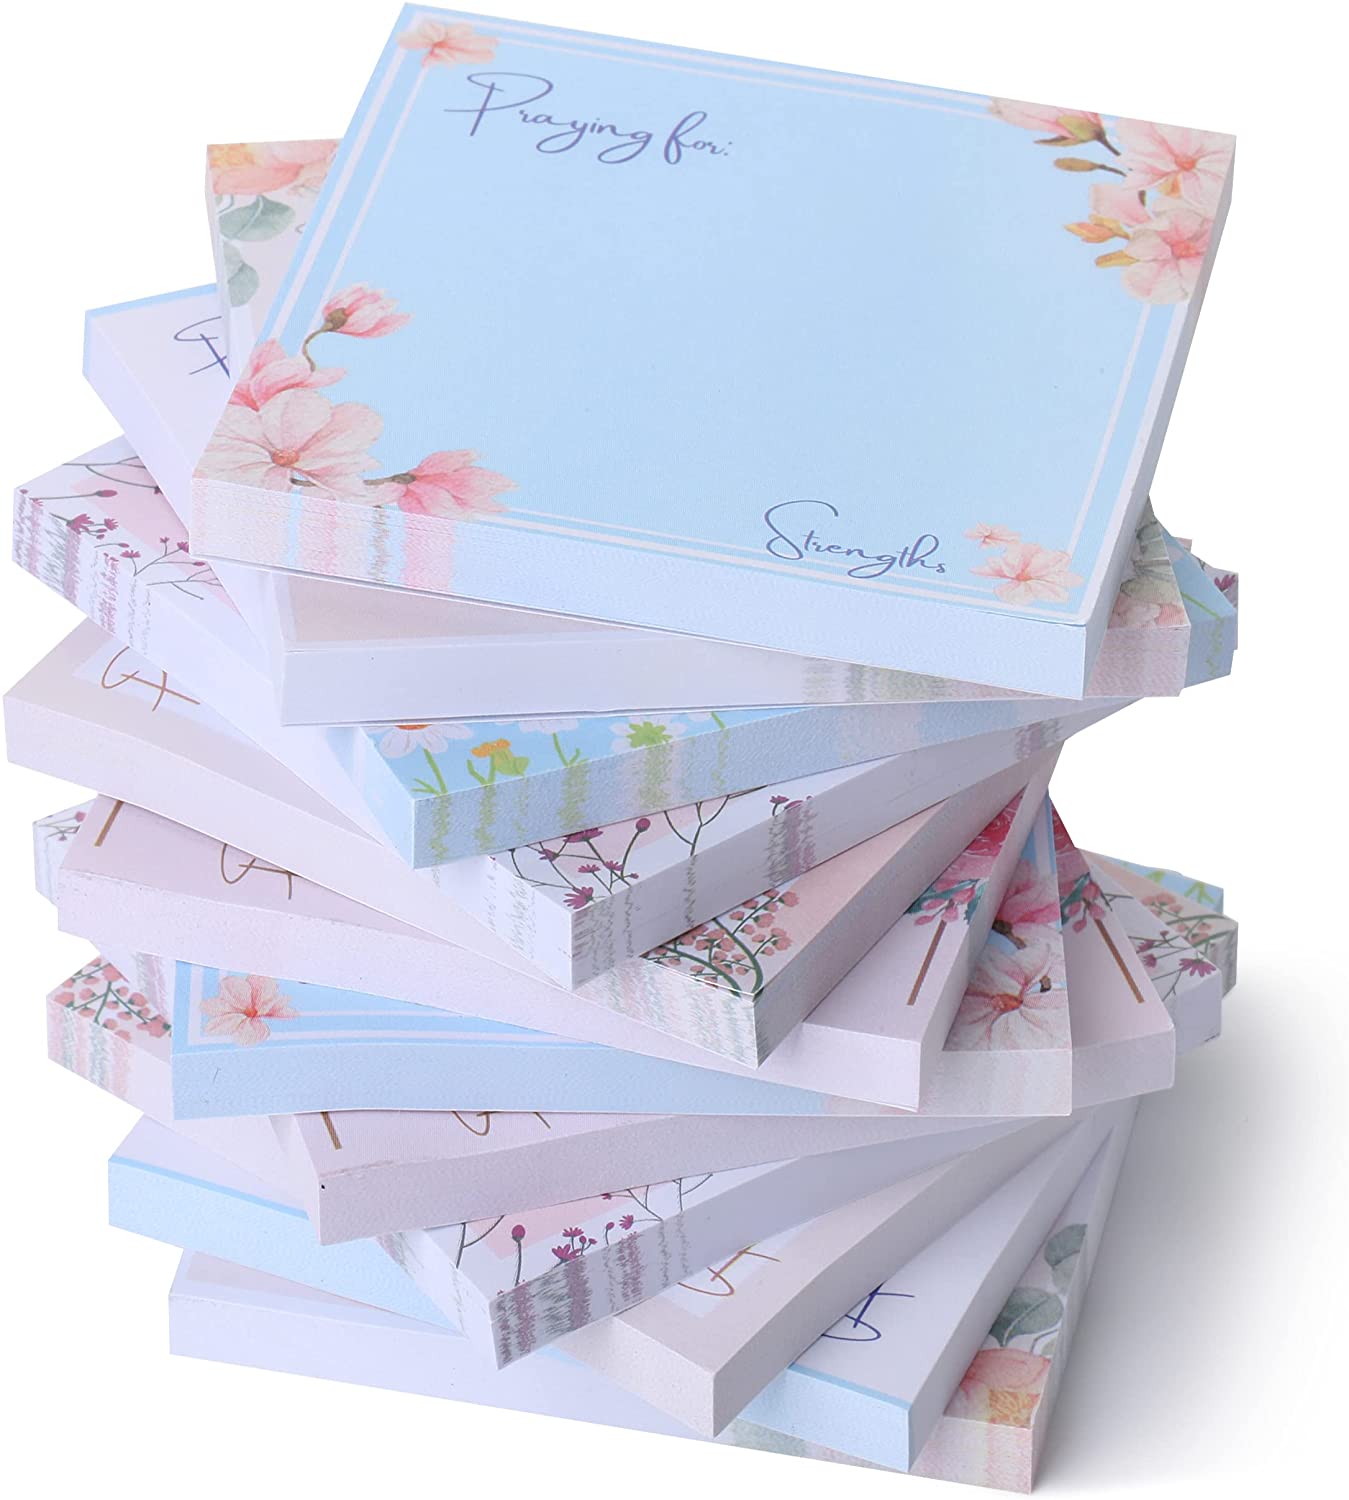 Mr. Pen- Religious Sticky Notes, 3"x3", 12 Pads, Bible Sticky Notes, Sticky Notes, Christian Sticky Notes